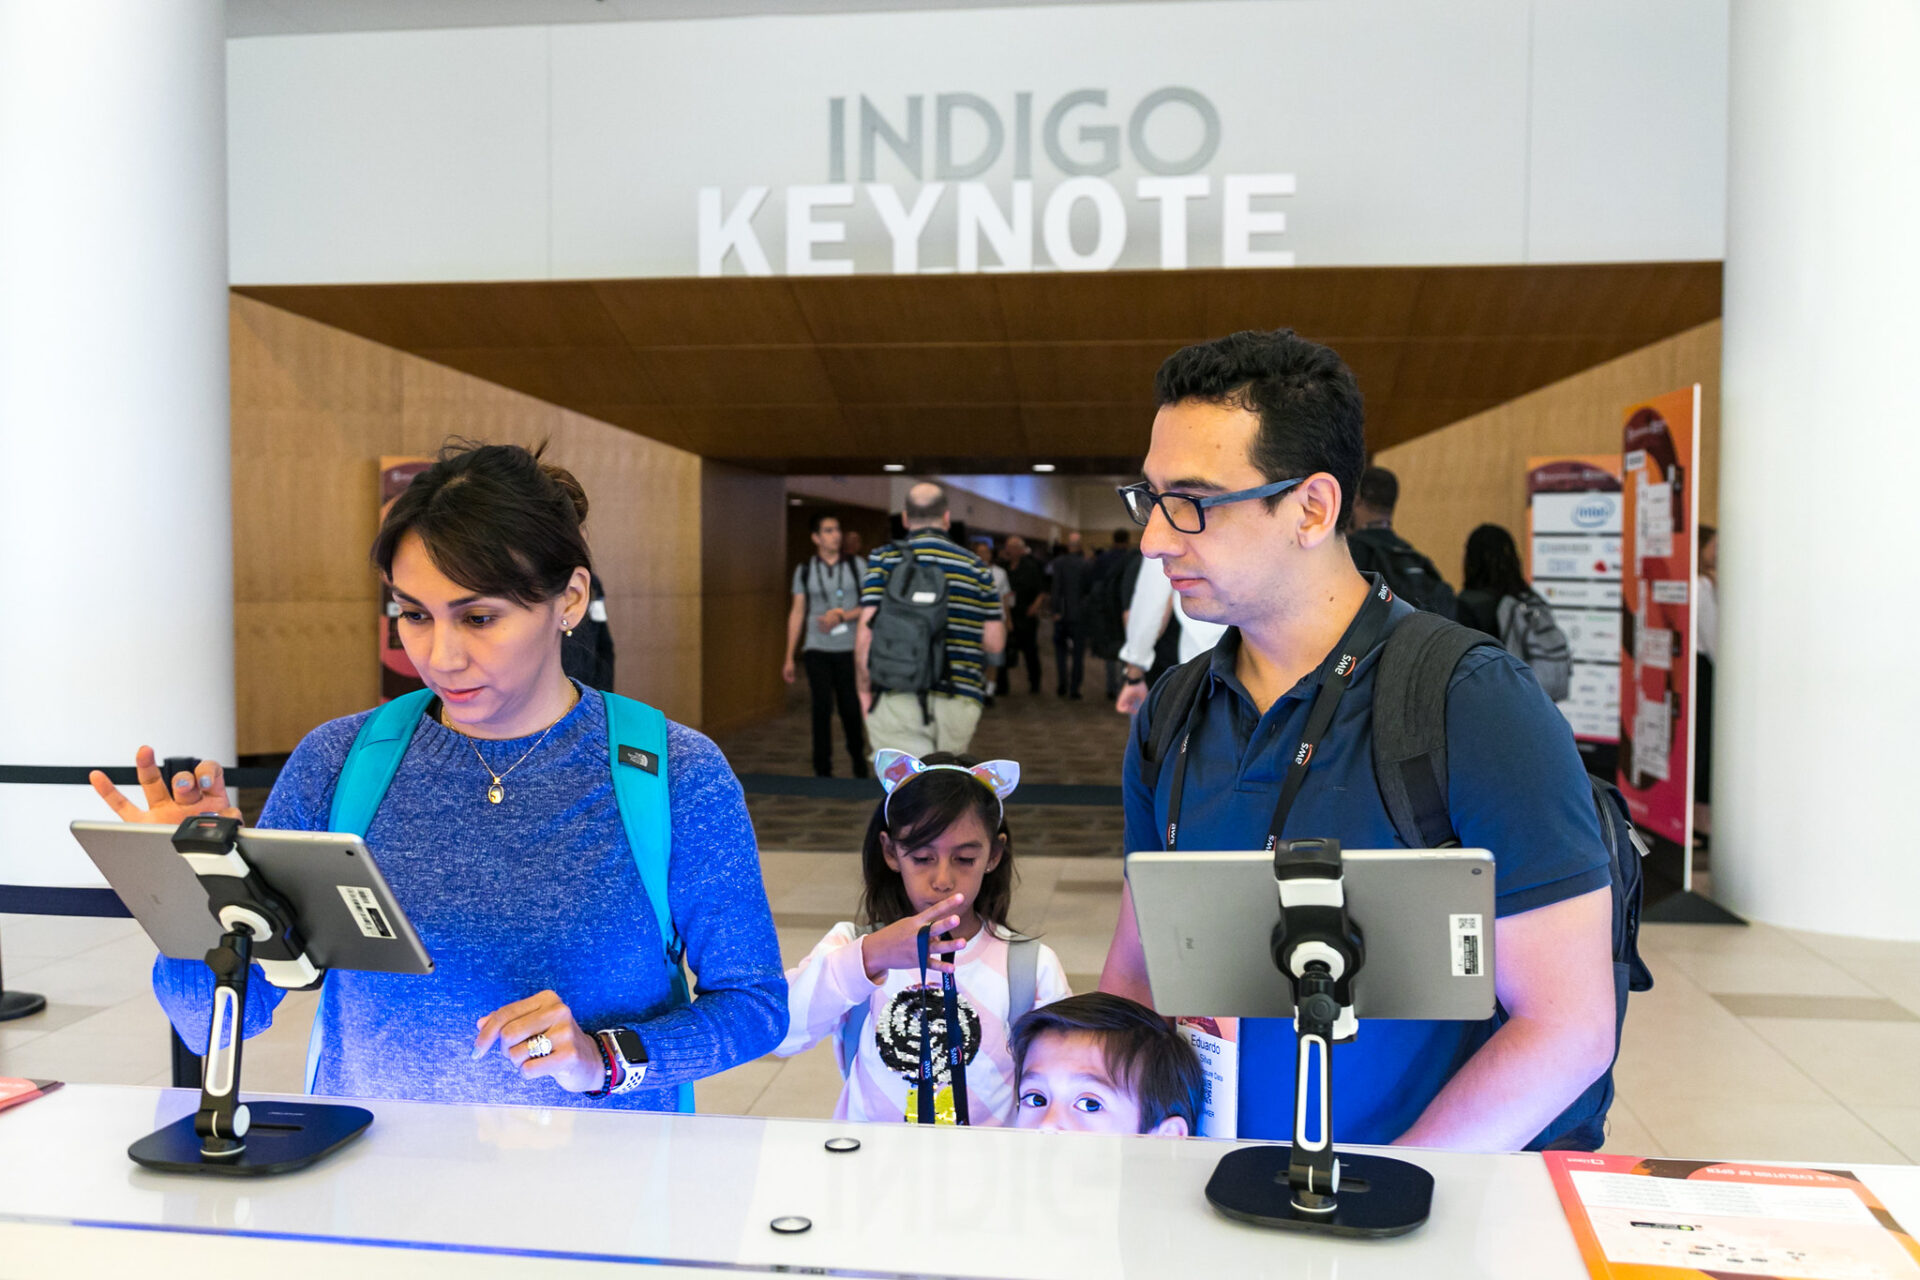 A couple with kids completing registration using an Ipad before event starts